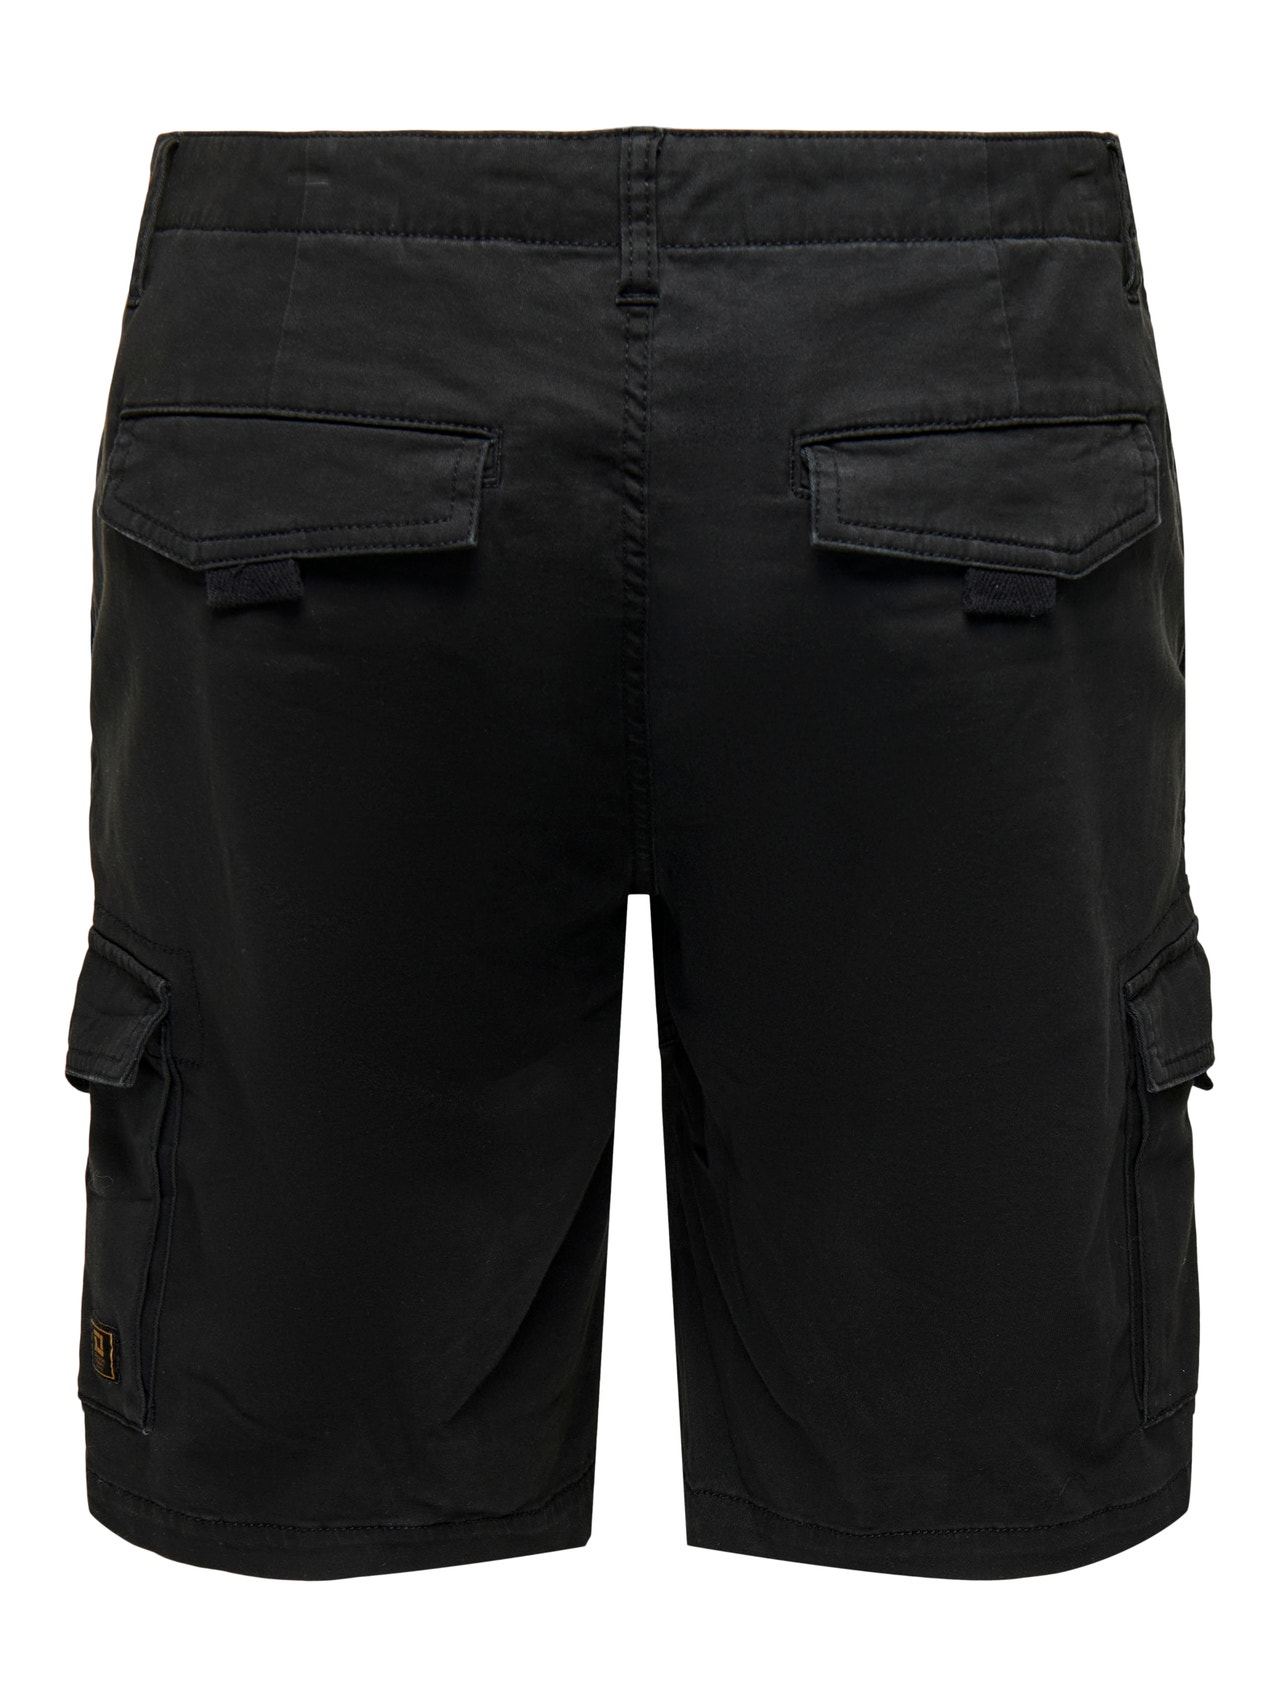 ONLY & SONS Regular fit Cargo shorts -Black - 22025602